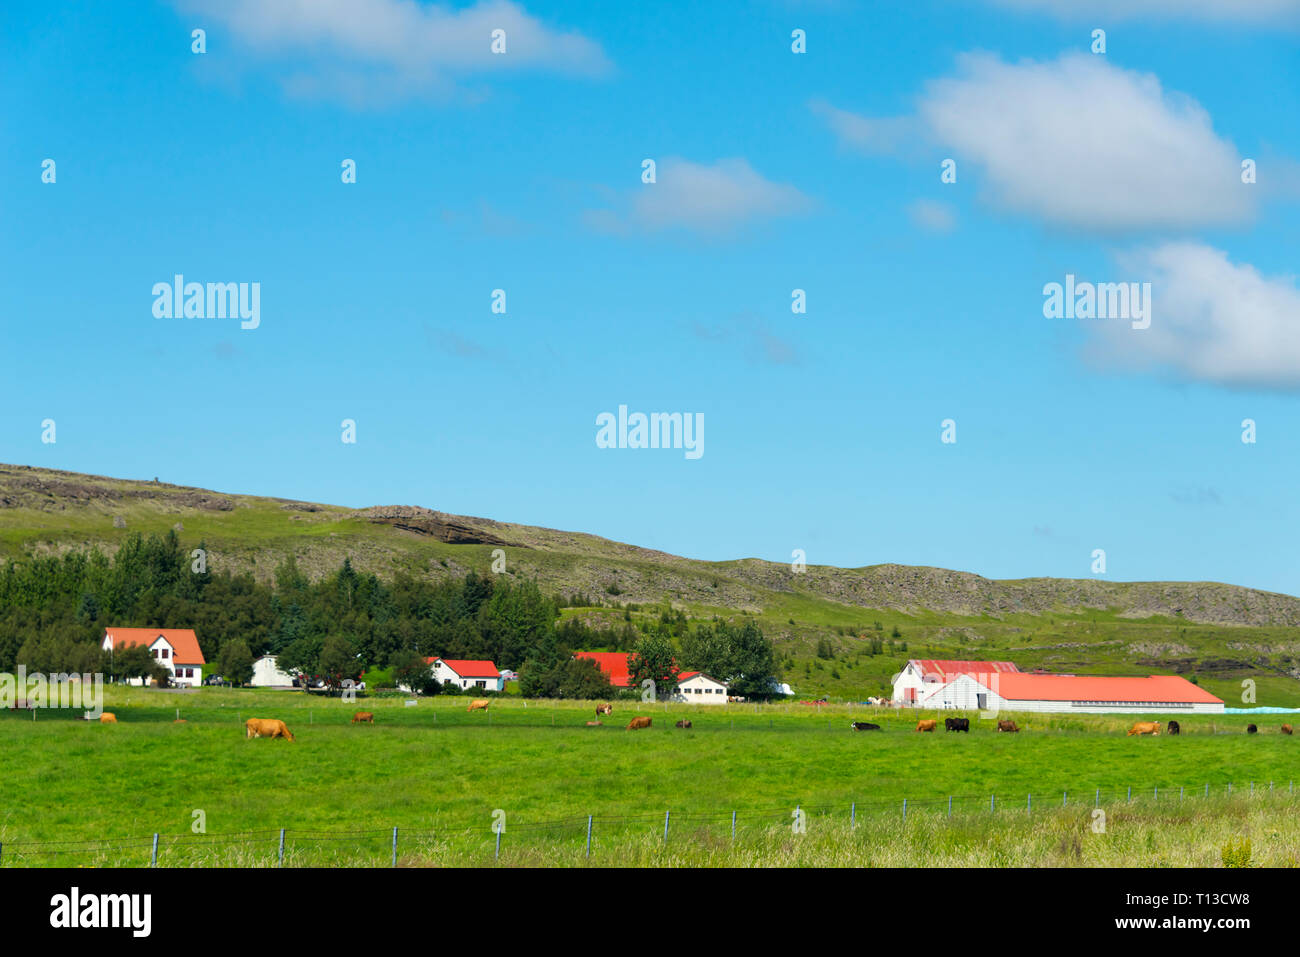 Farm house and cattle on ranch, south Iceland Stock Photo